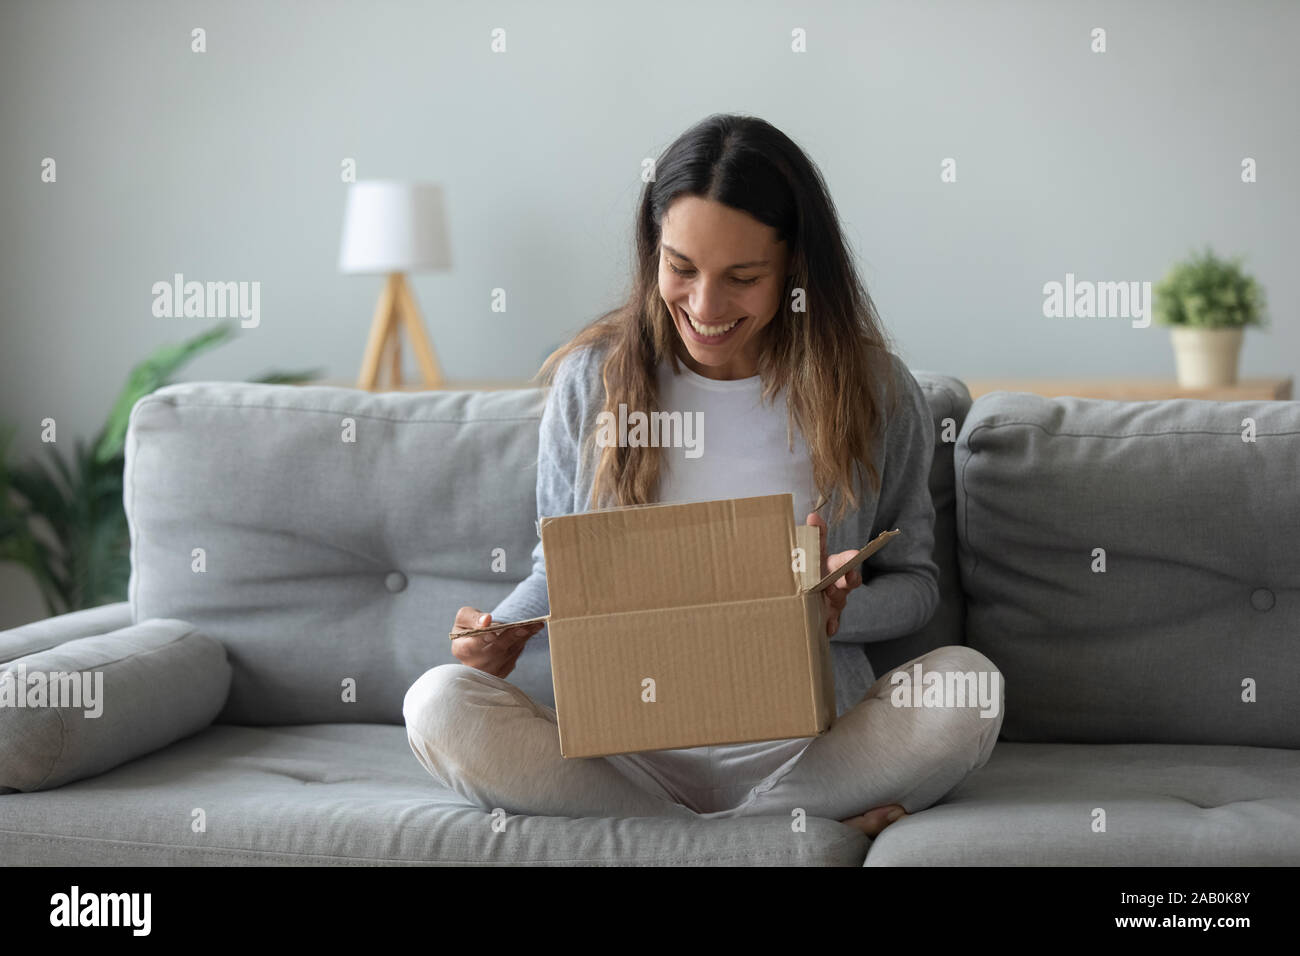 Overjoyed young woman opens box parcel feels satisfied Stock Photo